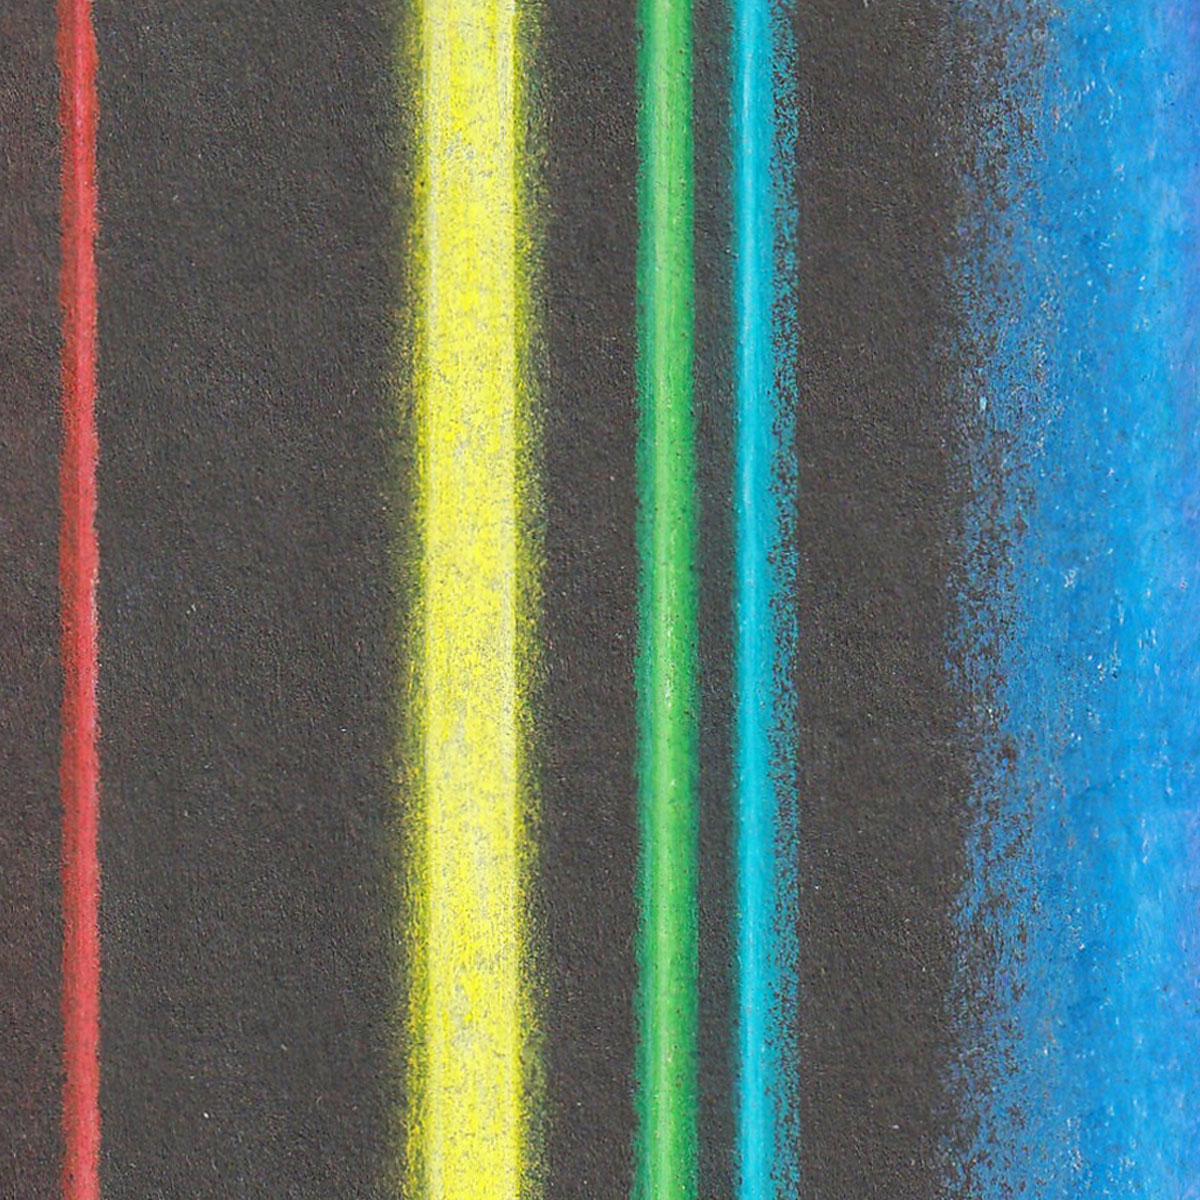 Vertical stripes of red, yellow, green, blue, and purple against a black background